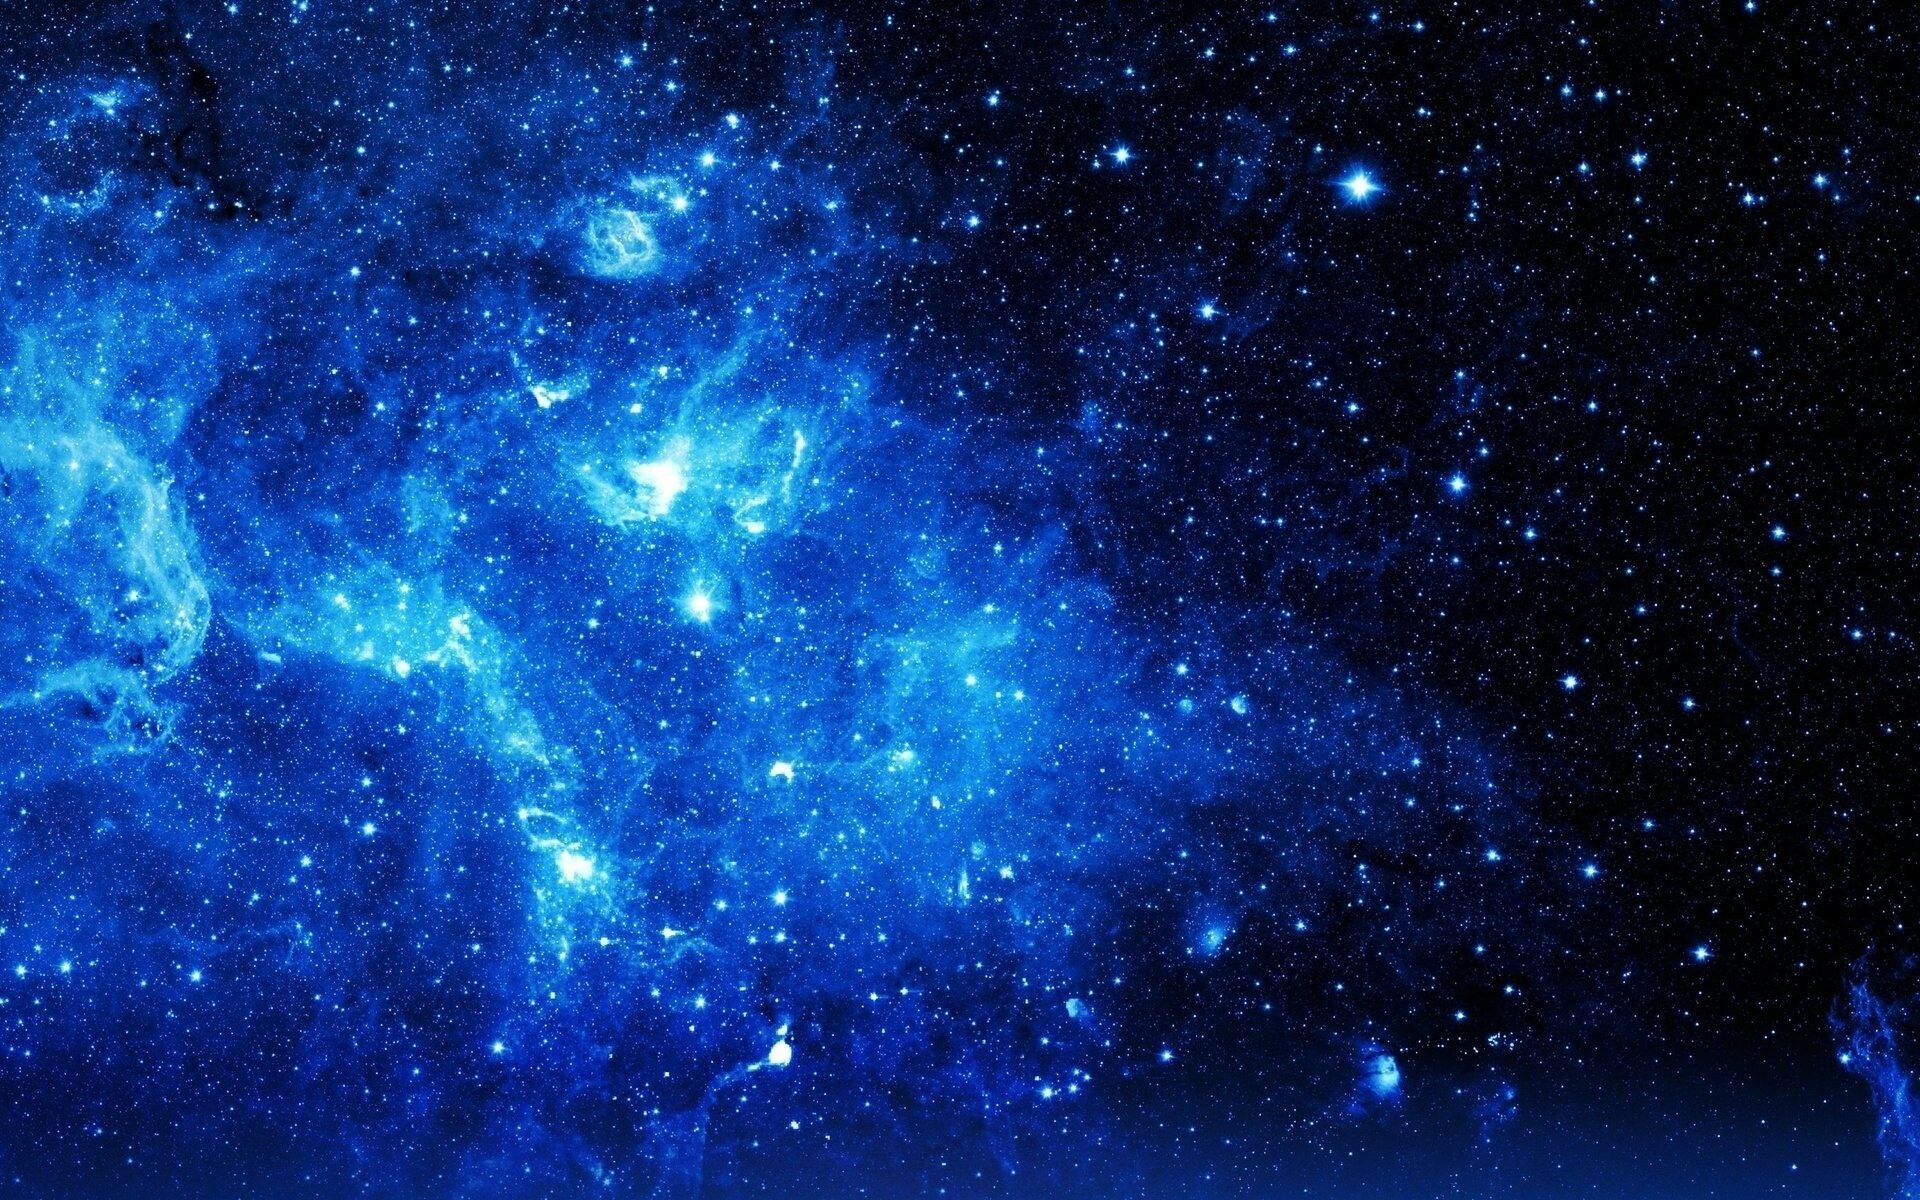 Blue Universe Space Wallpaper: HD, 4K, 5K for PC and Mobile. Download free image for iPhone, Android